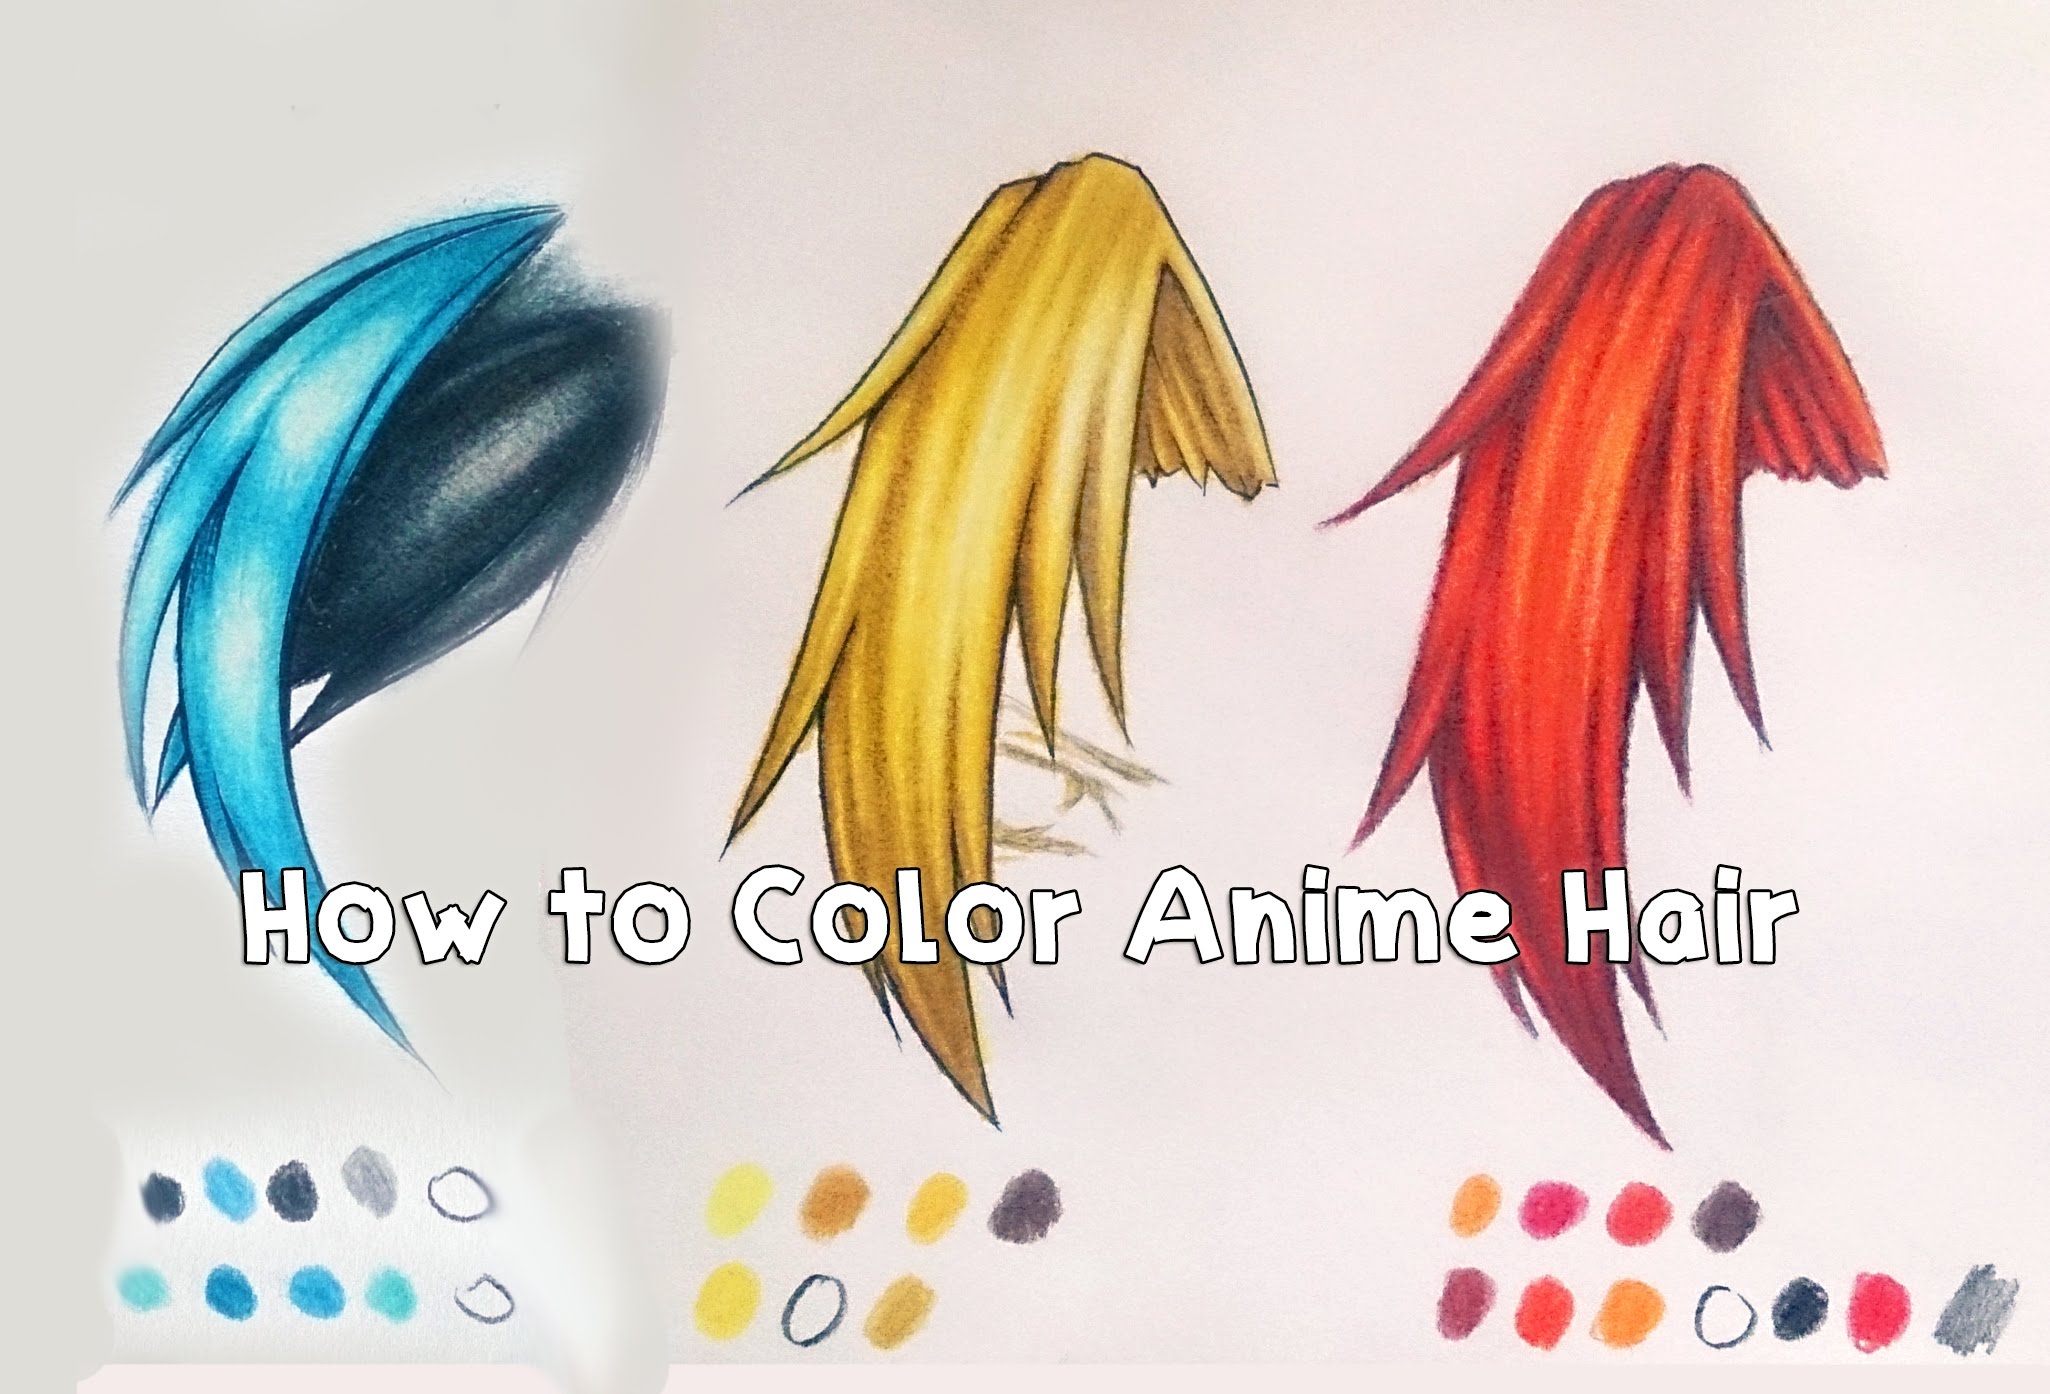 Hair Coloring Tutorial Using Color Pencils - YouTube